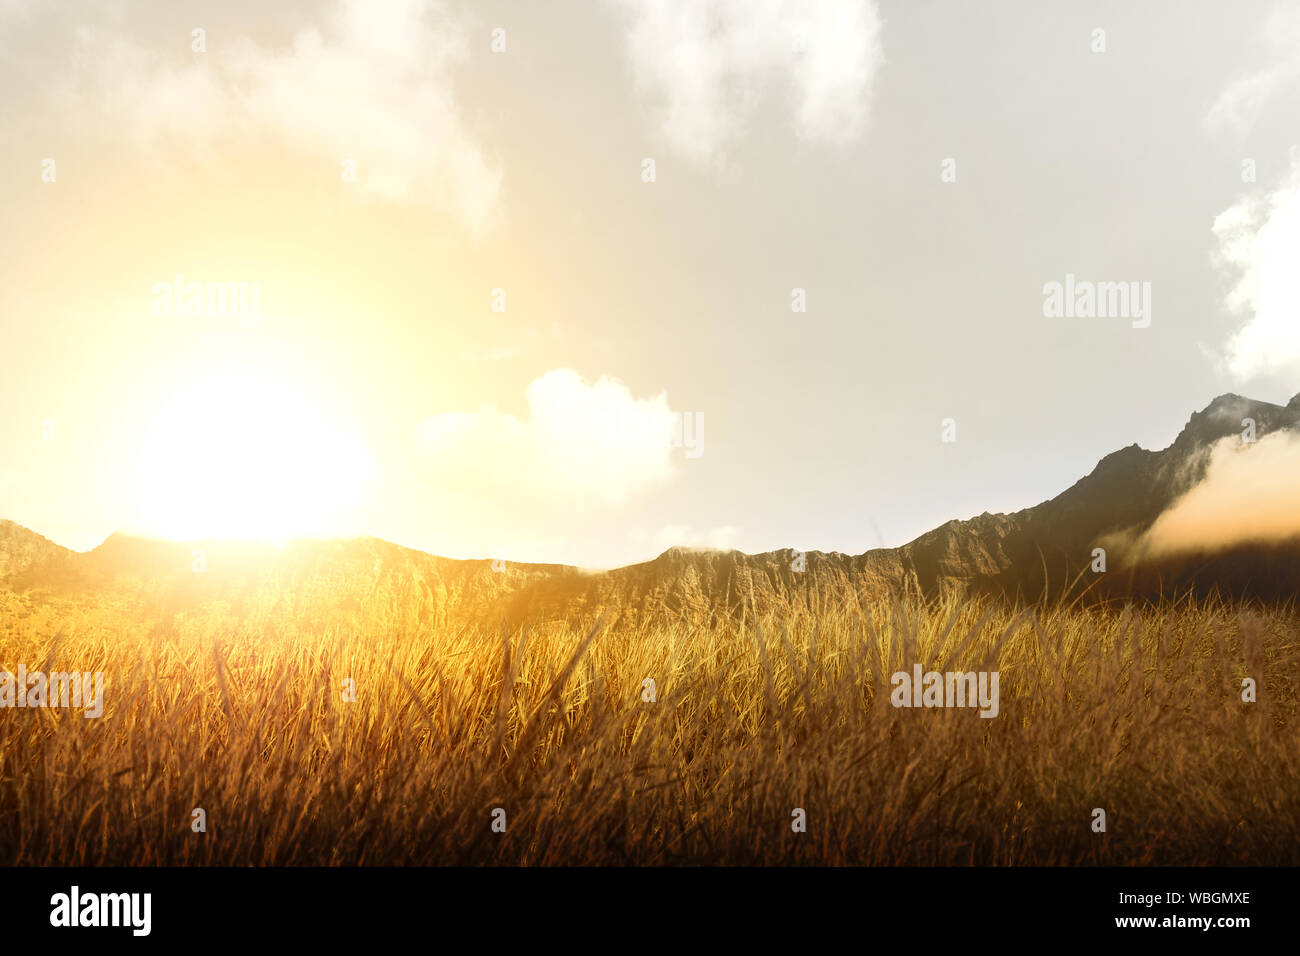 Dry grass field with mountain and sunlight over sky background Stock Photo